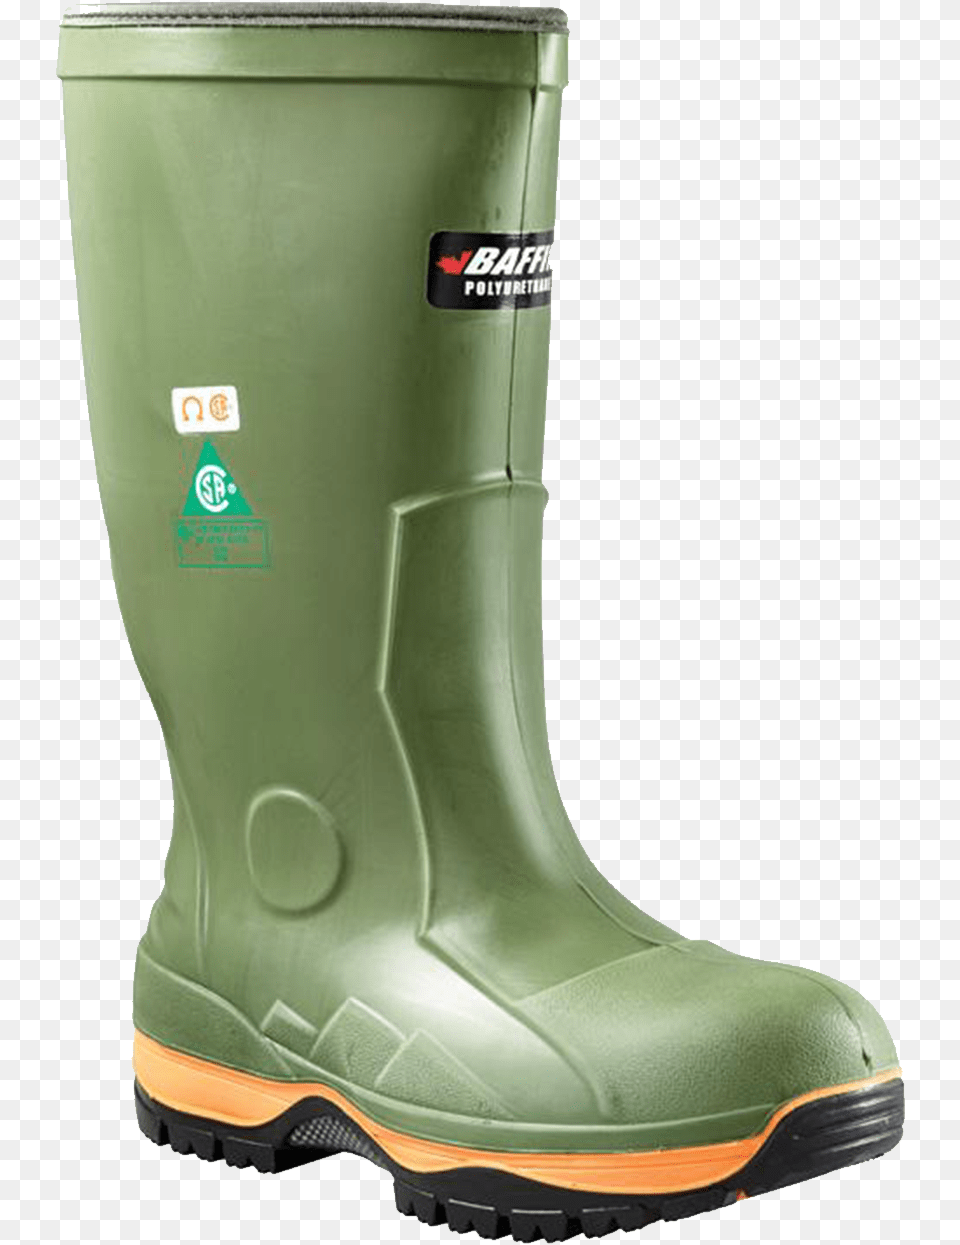 Baffin Green Rubber Boots, Clothing, Footwear, Shoe, Boot Png Image